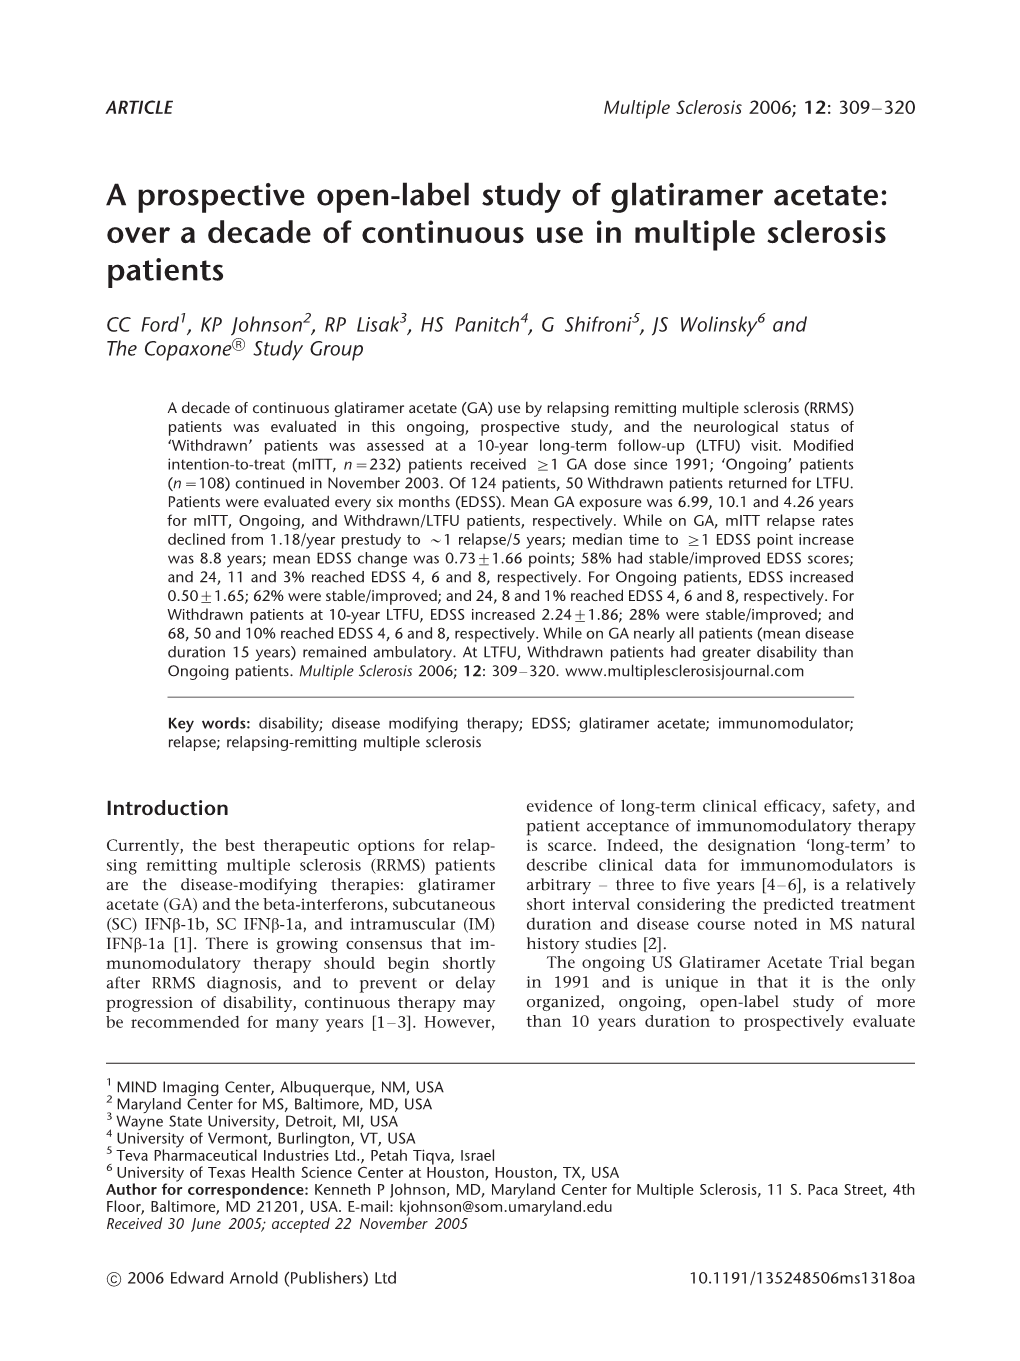 A Prospective Open-Label Study of Glatiramer Acetate: Over a Decade of Continuous Use in Multiple Sclerosis Patients